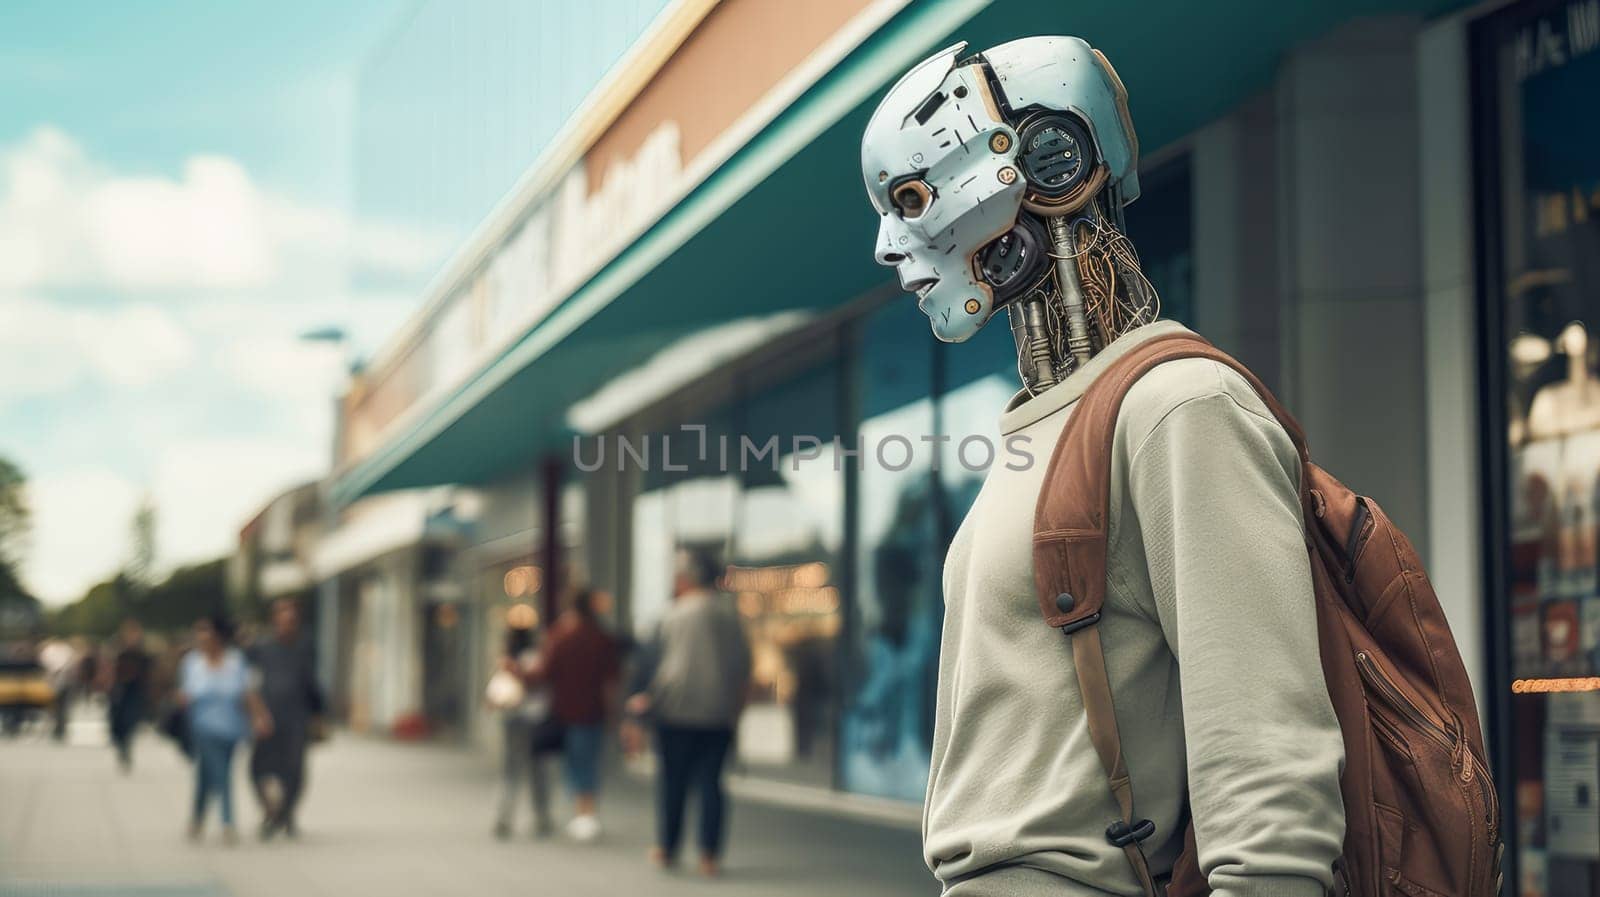 Cyborg robot in the middle of the city by Alla_Yurtayeva